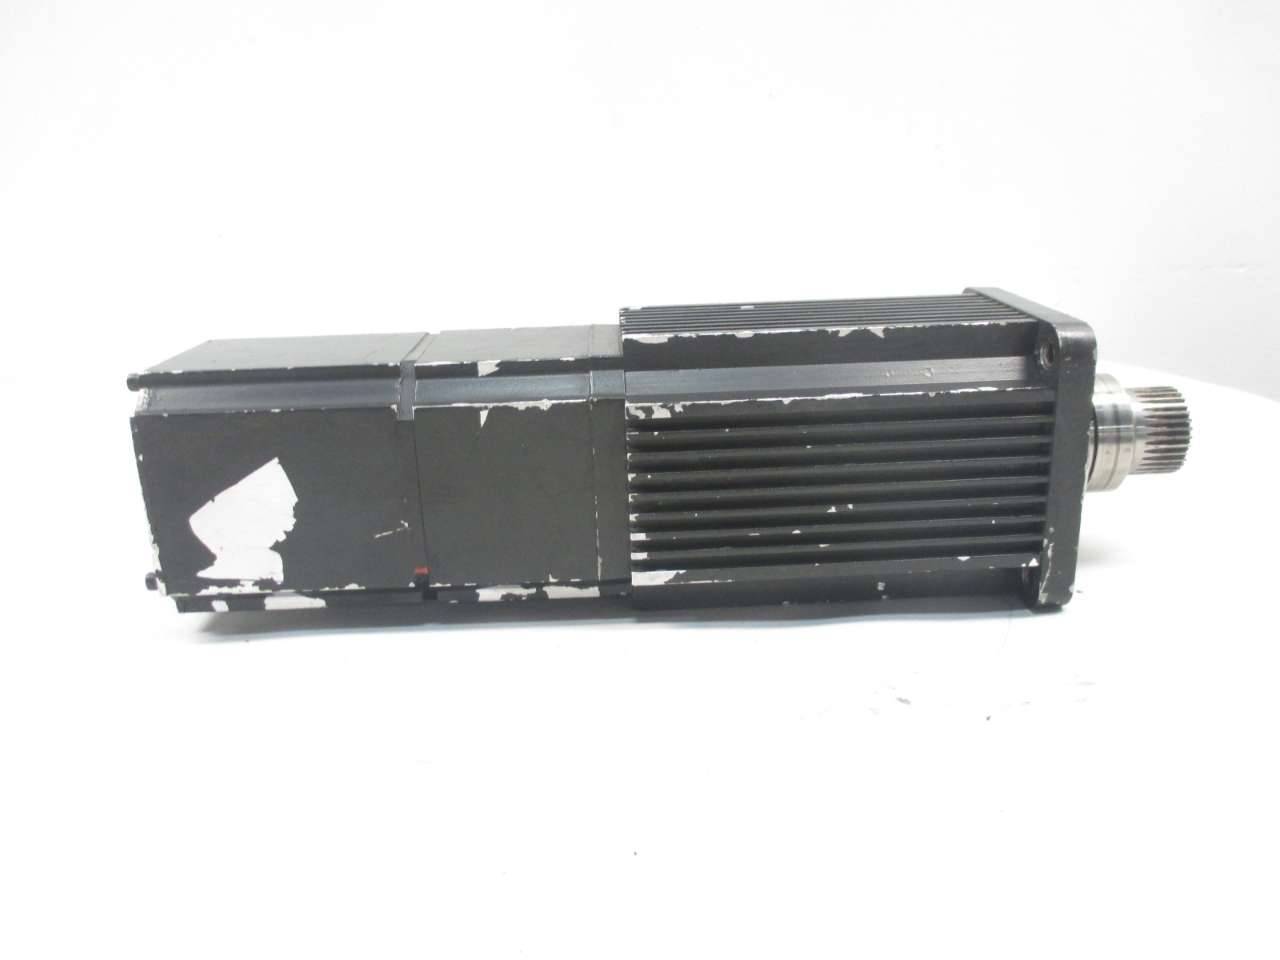 Reliance Part # 6003-03-802 Details about    Electro-Craft Mod# S-3016-N-H00AA Servo Motor